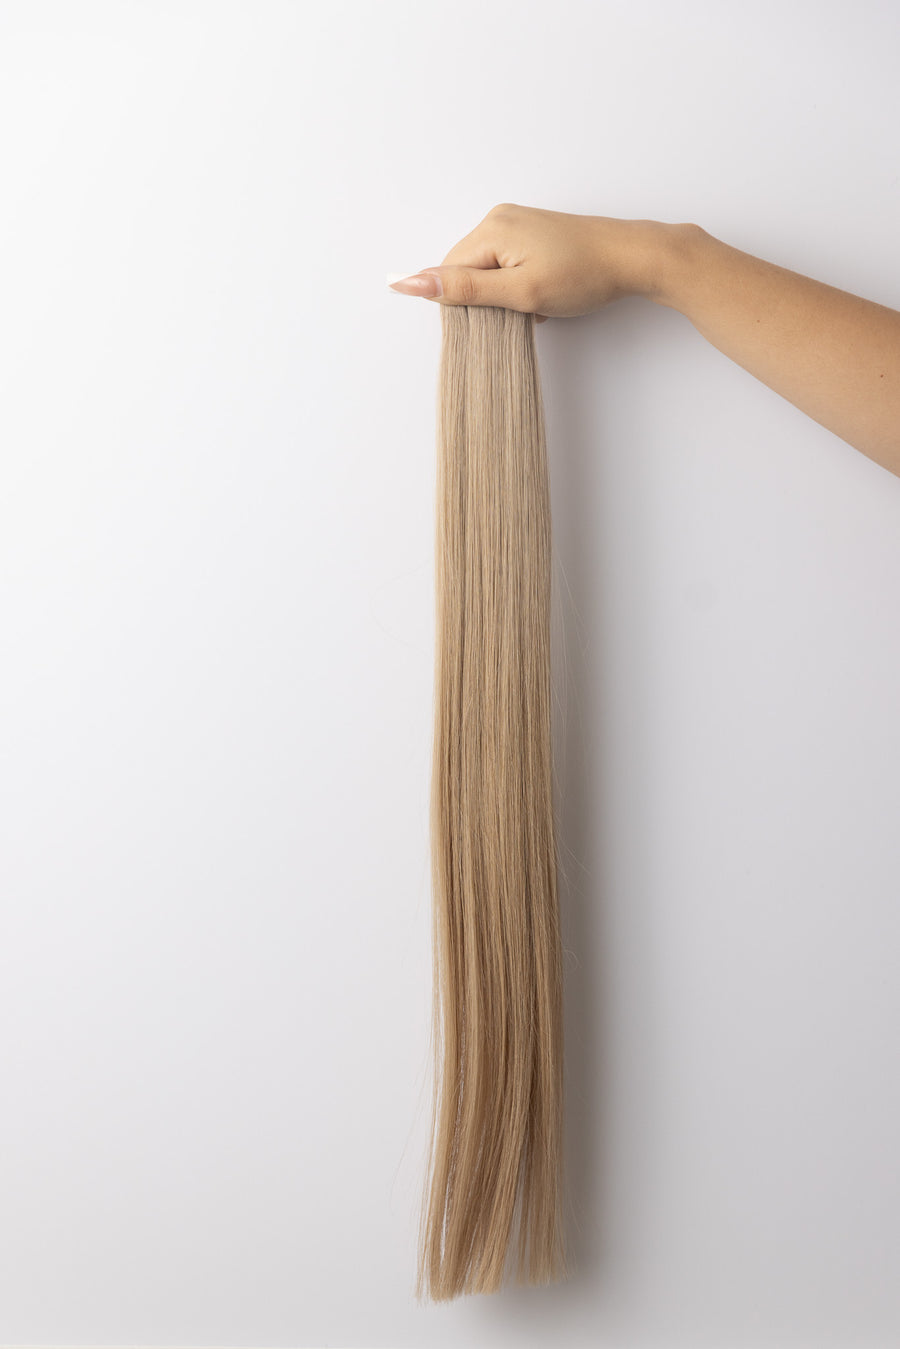 Sandy Candy Undetectable Tape Ins-Christian Michael Hair Extensions